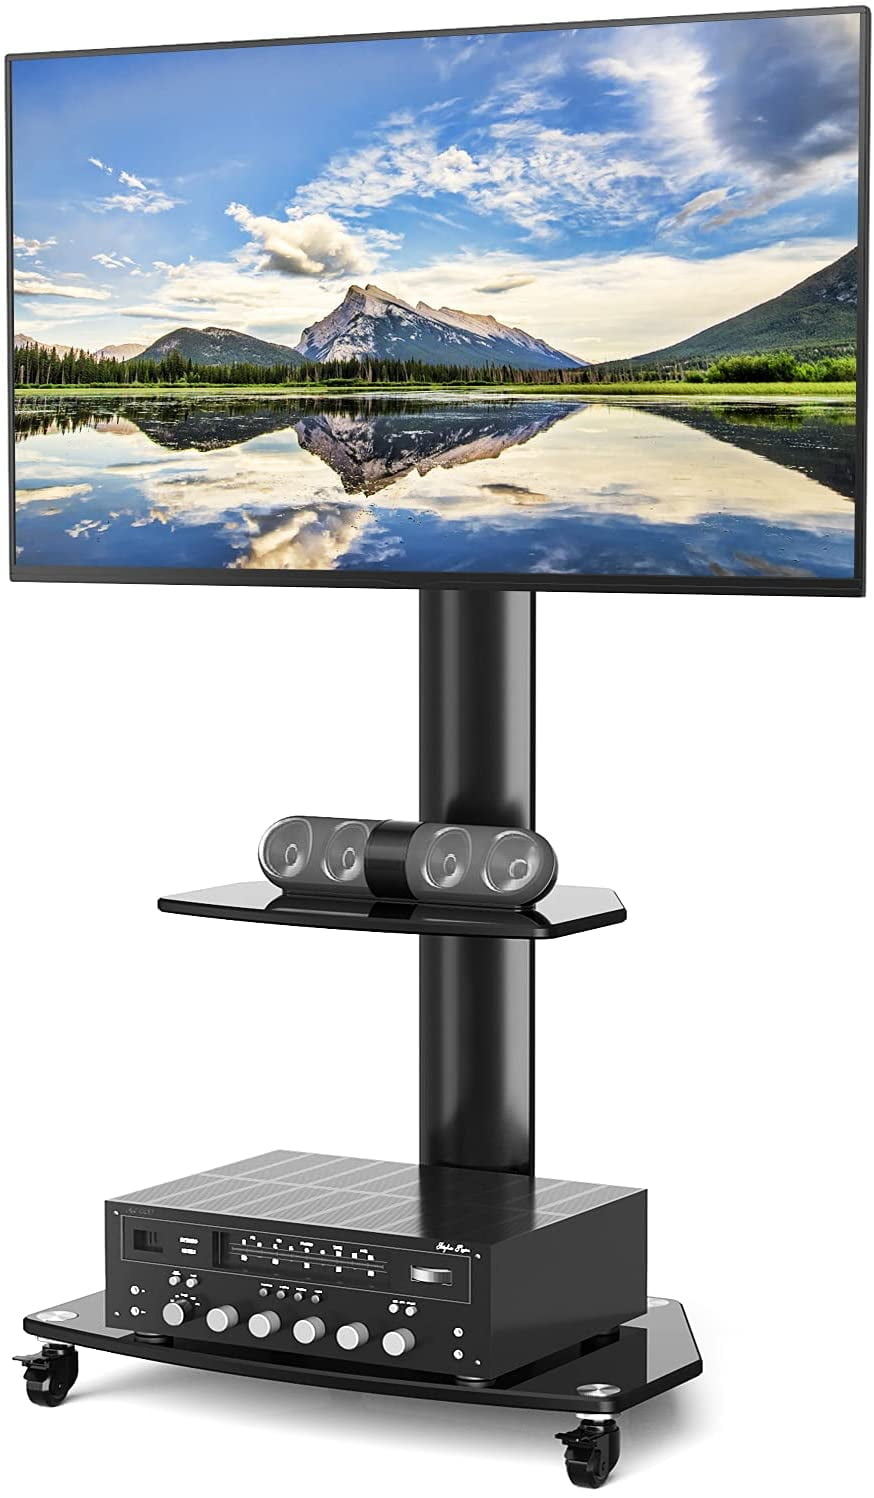 Tall Floor TV Stand with Swivel Mount for 27-55 inch TVs 